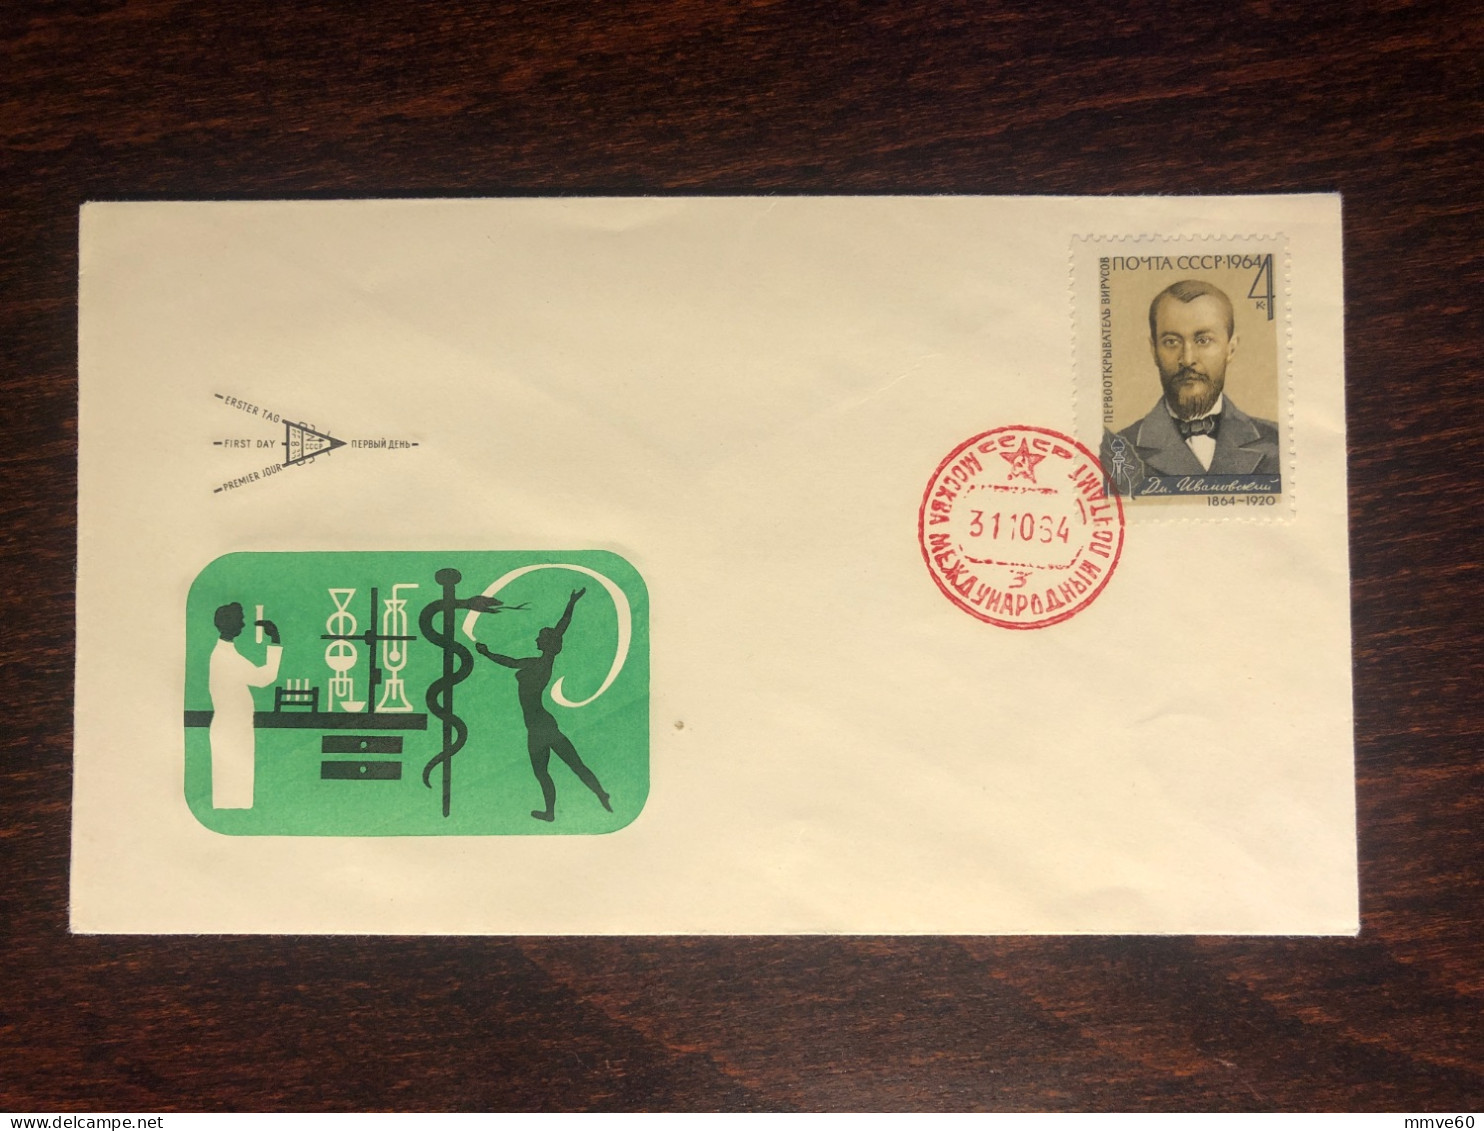 RUSSIA USSR FDC COVER 1964 YEAR IVANOVSKY VIROLOGY BACTERIOLOGY HEALTH MEDICINE STAMPS - Covers & Documents